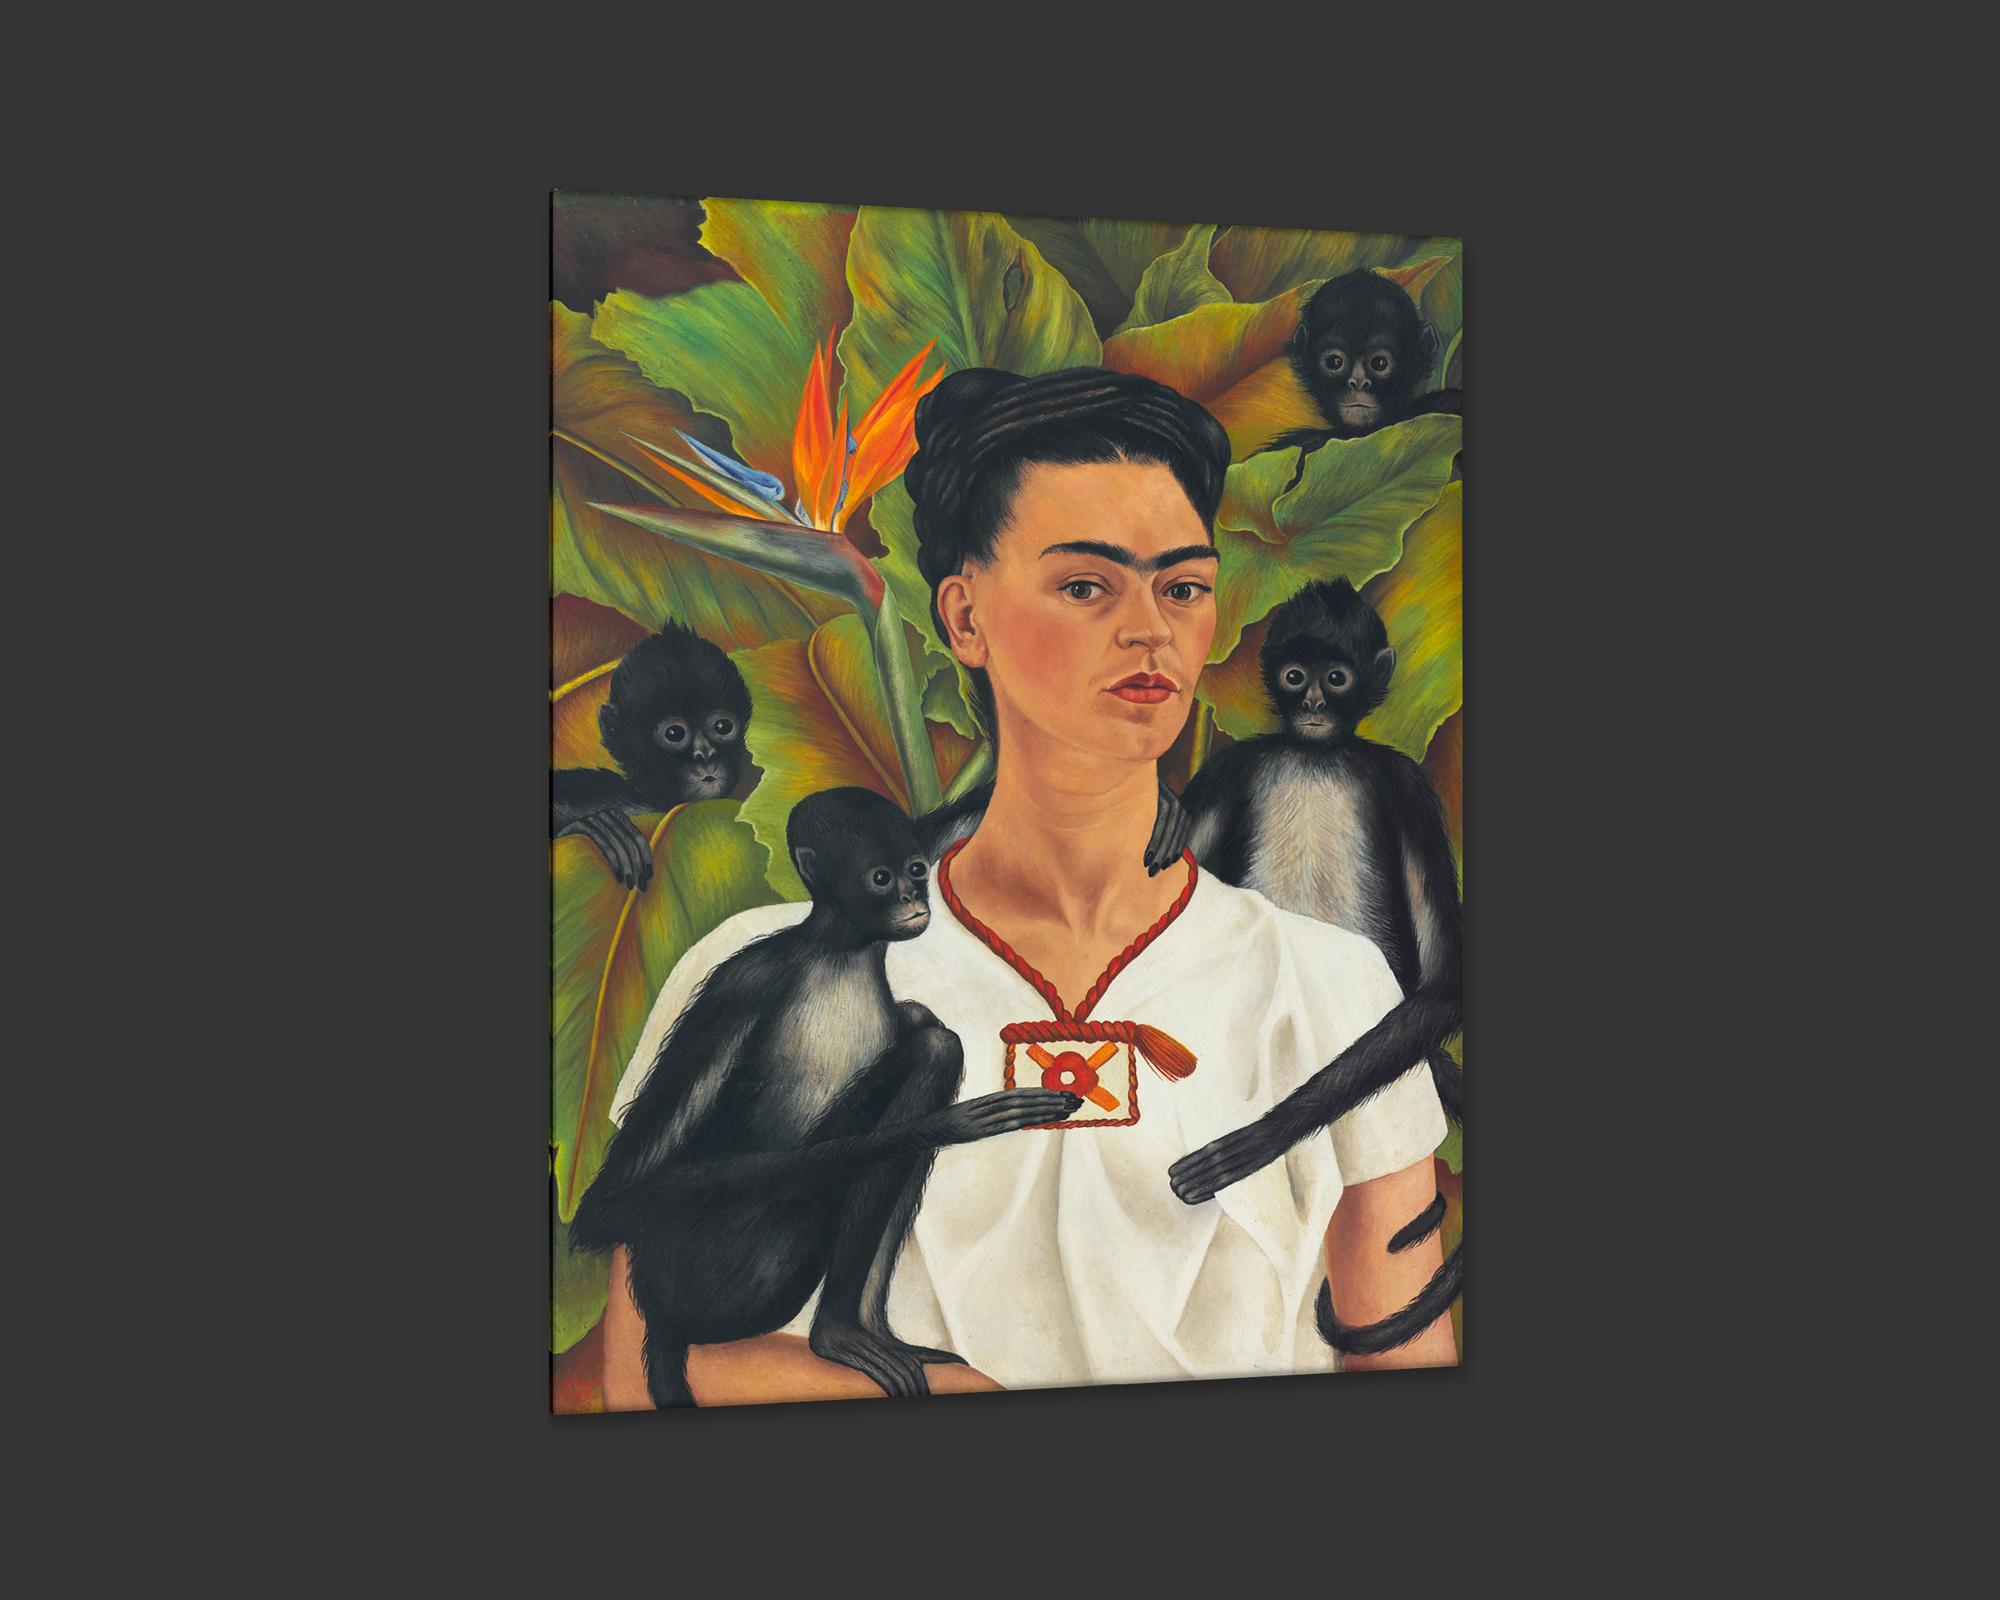 Mexican Frida Kahlo Self-Portrait, after Oil Painting by Expressionist Artist For Sale